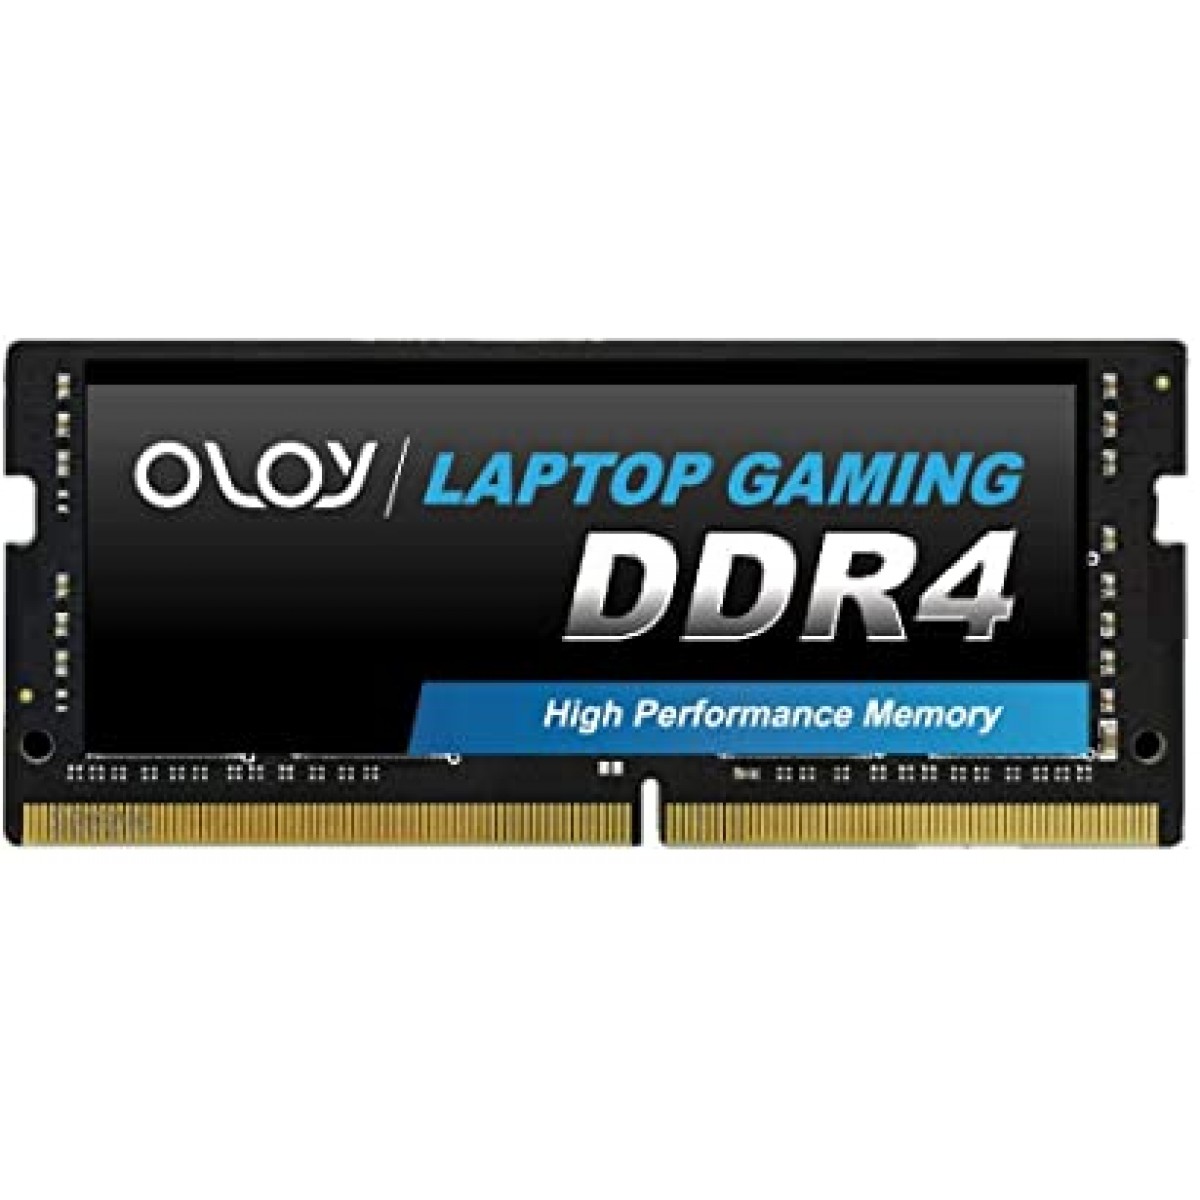 Memória Notebook DDR4 OLOy Laptop Gaming, 16GB, 2666MHZ, MD4S162619IZSC